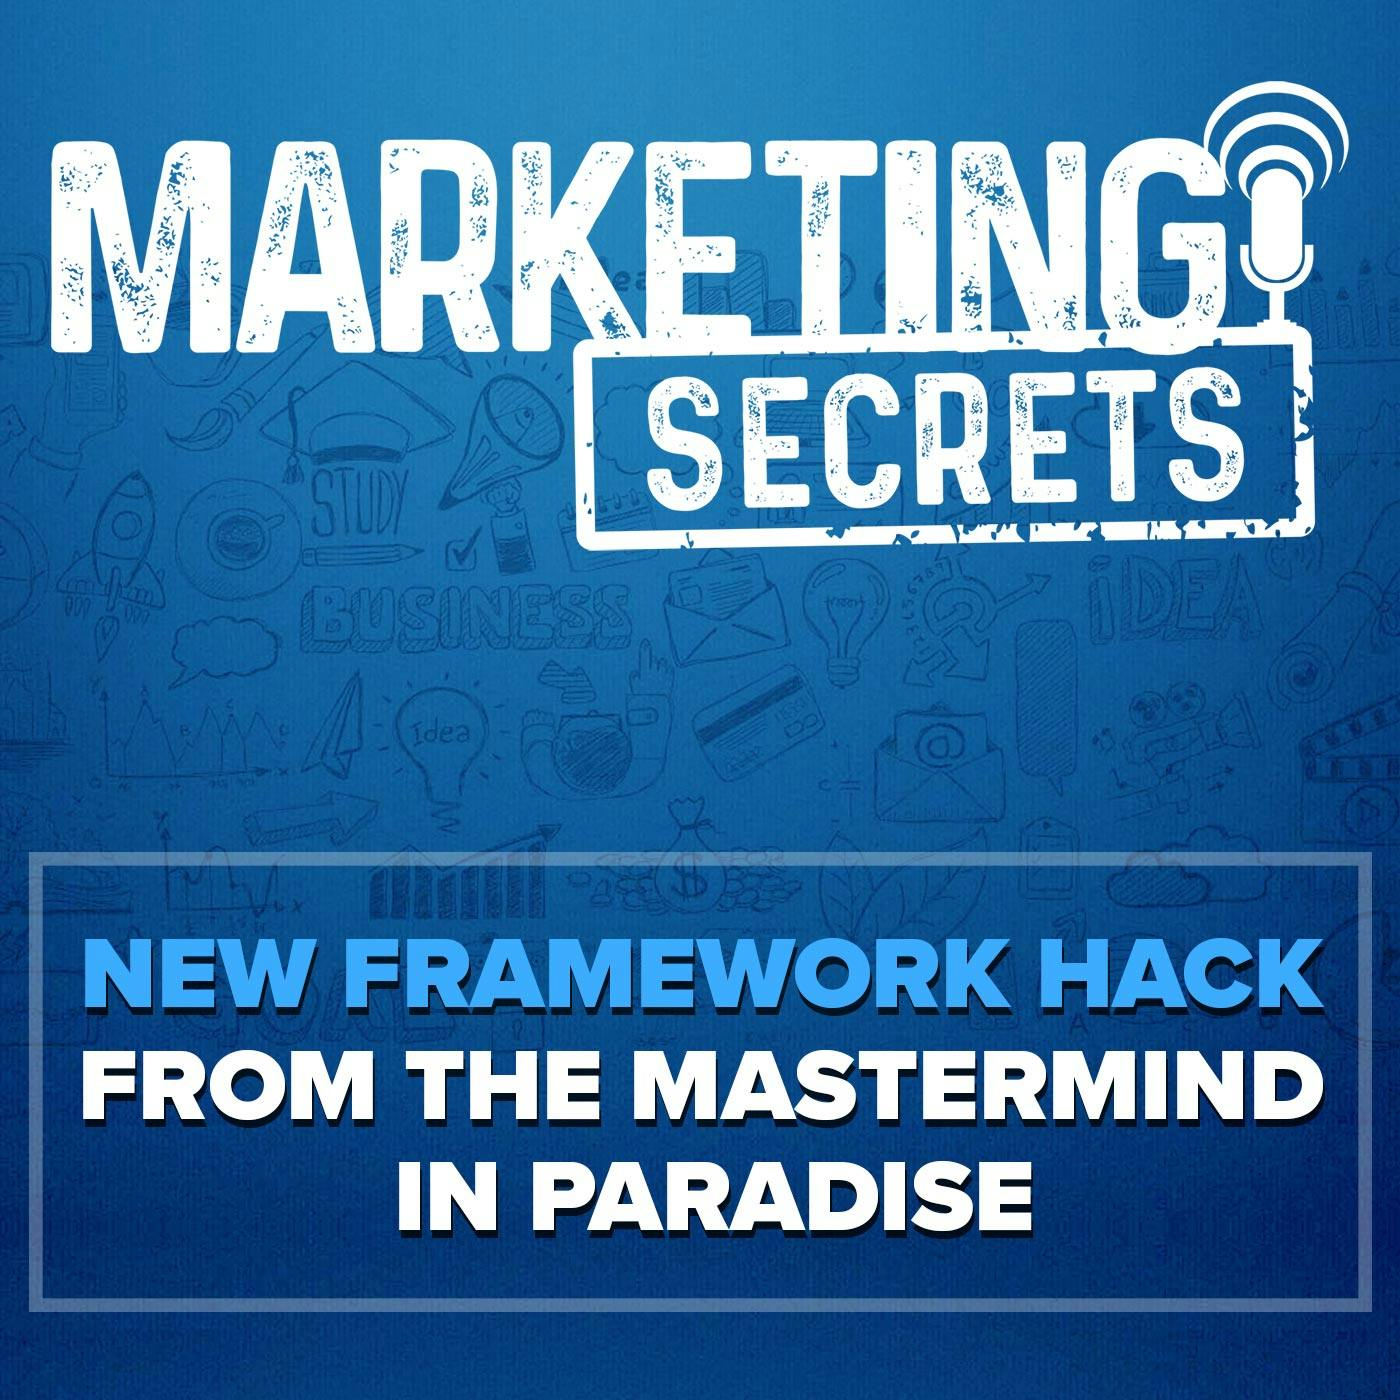 New Framework Hack From The Mastermind In Paradise